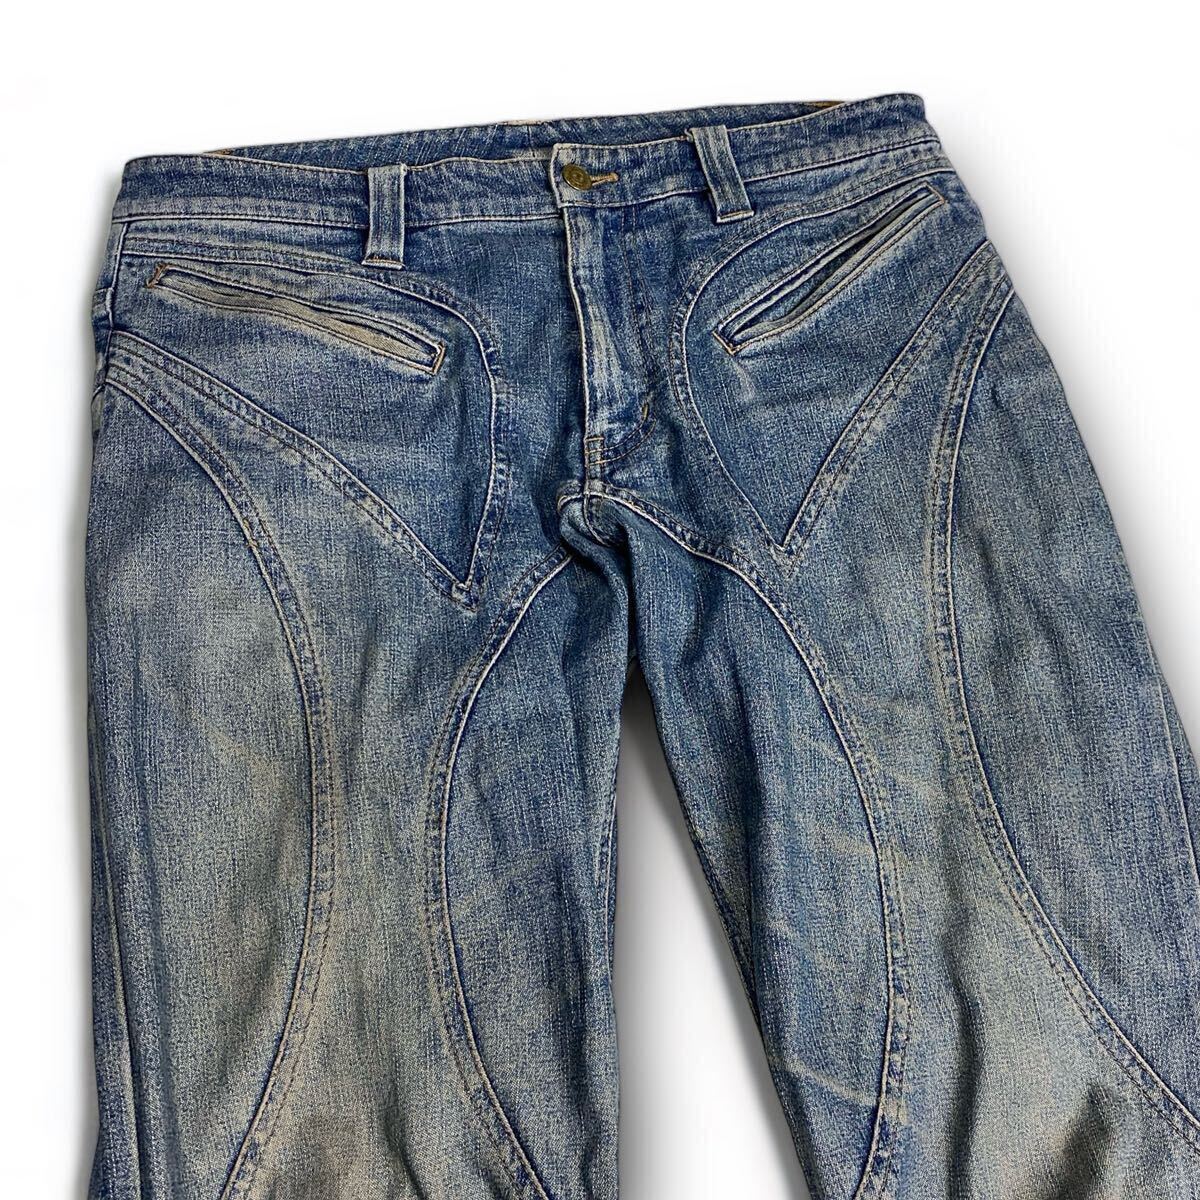 00s Tornado Mart Archive Distressed Lace Up Flared Jeans 